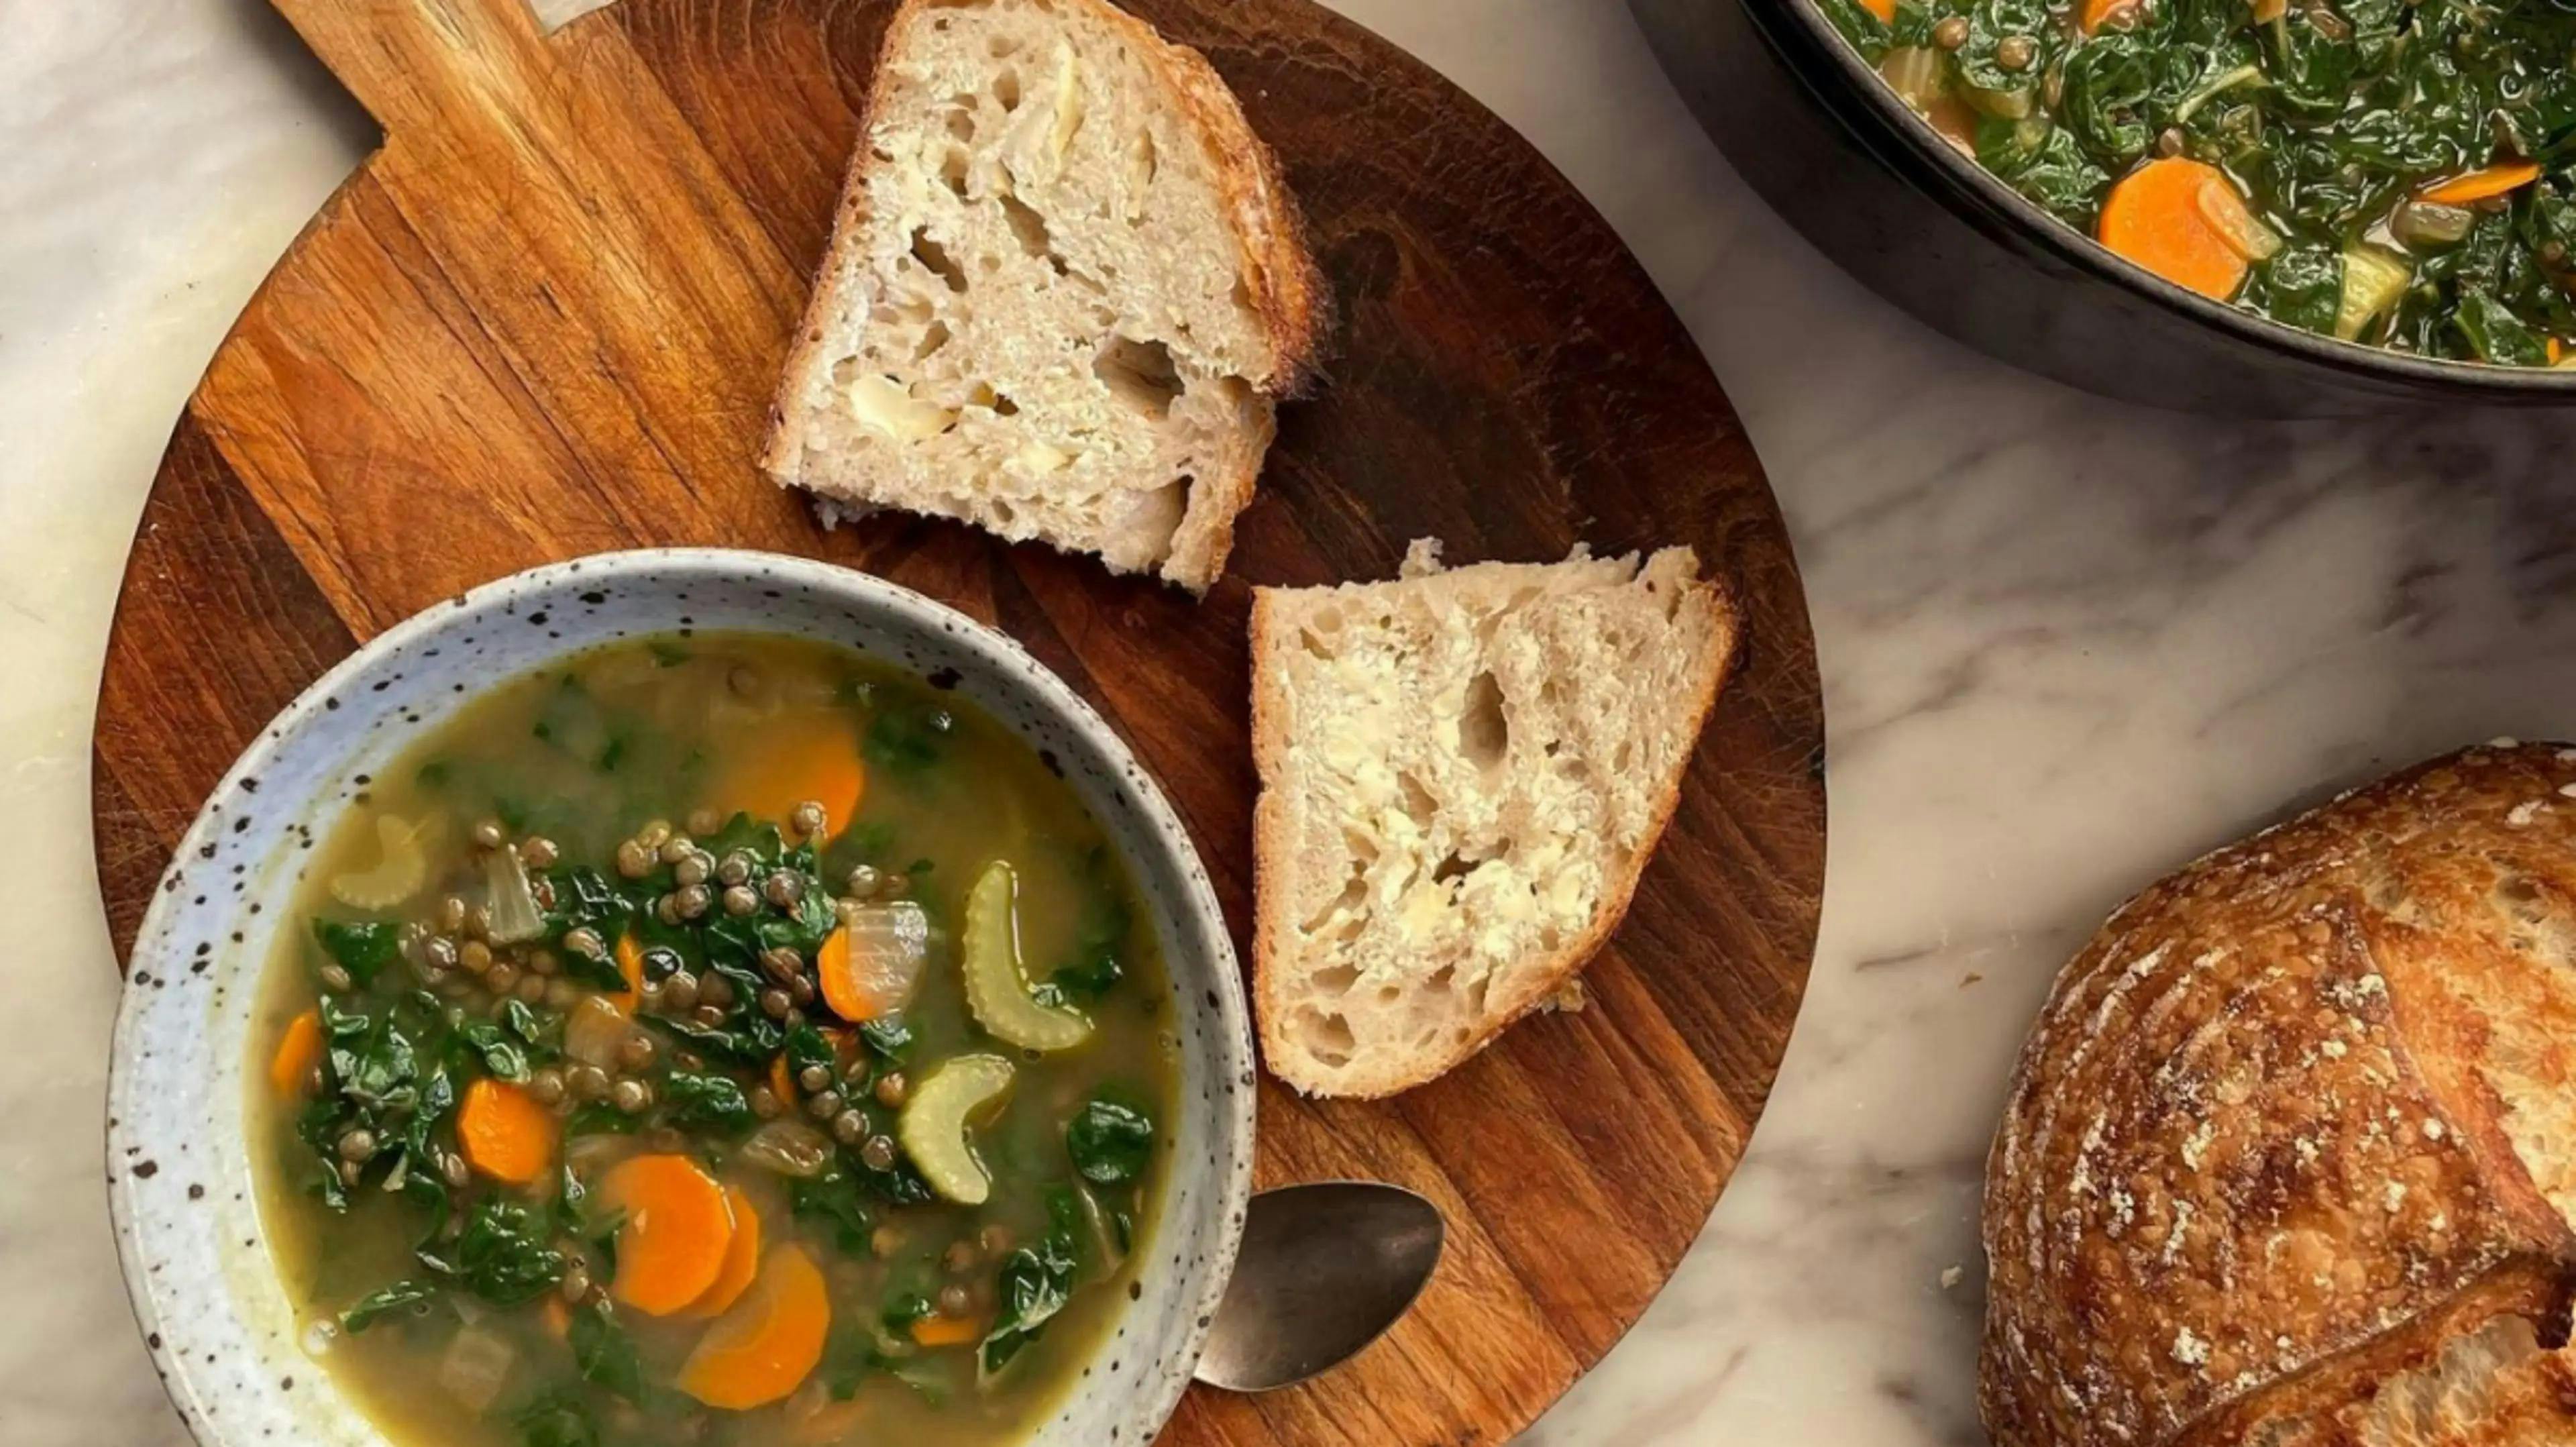 Sourdough bead with hearty soup